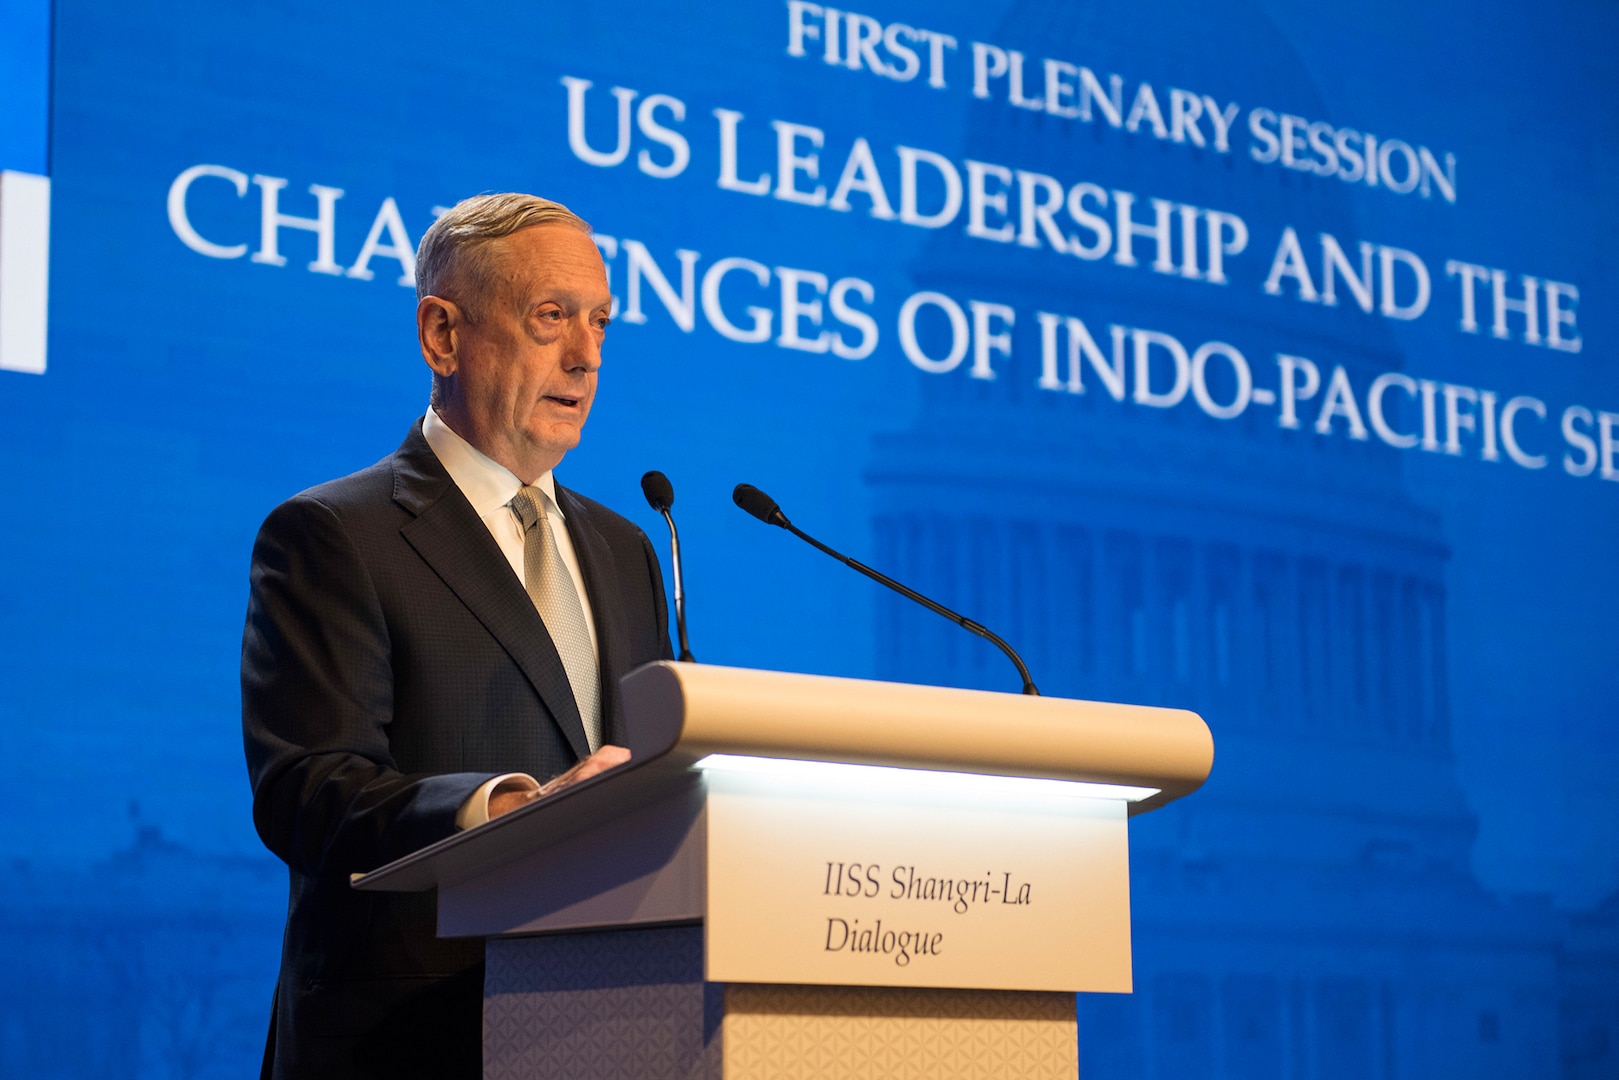 Alliances, partnerships critical to US Indo-Pacific strategy, Mattis says